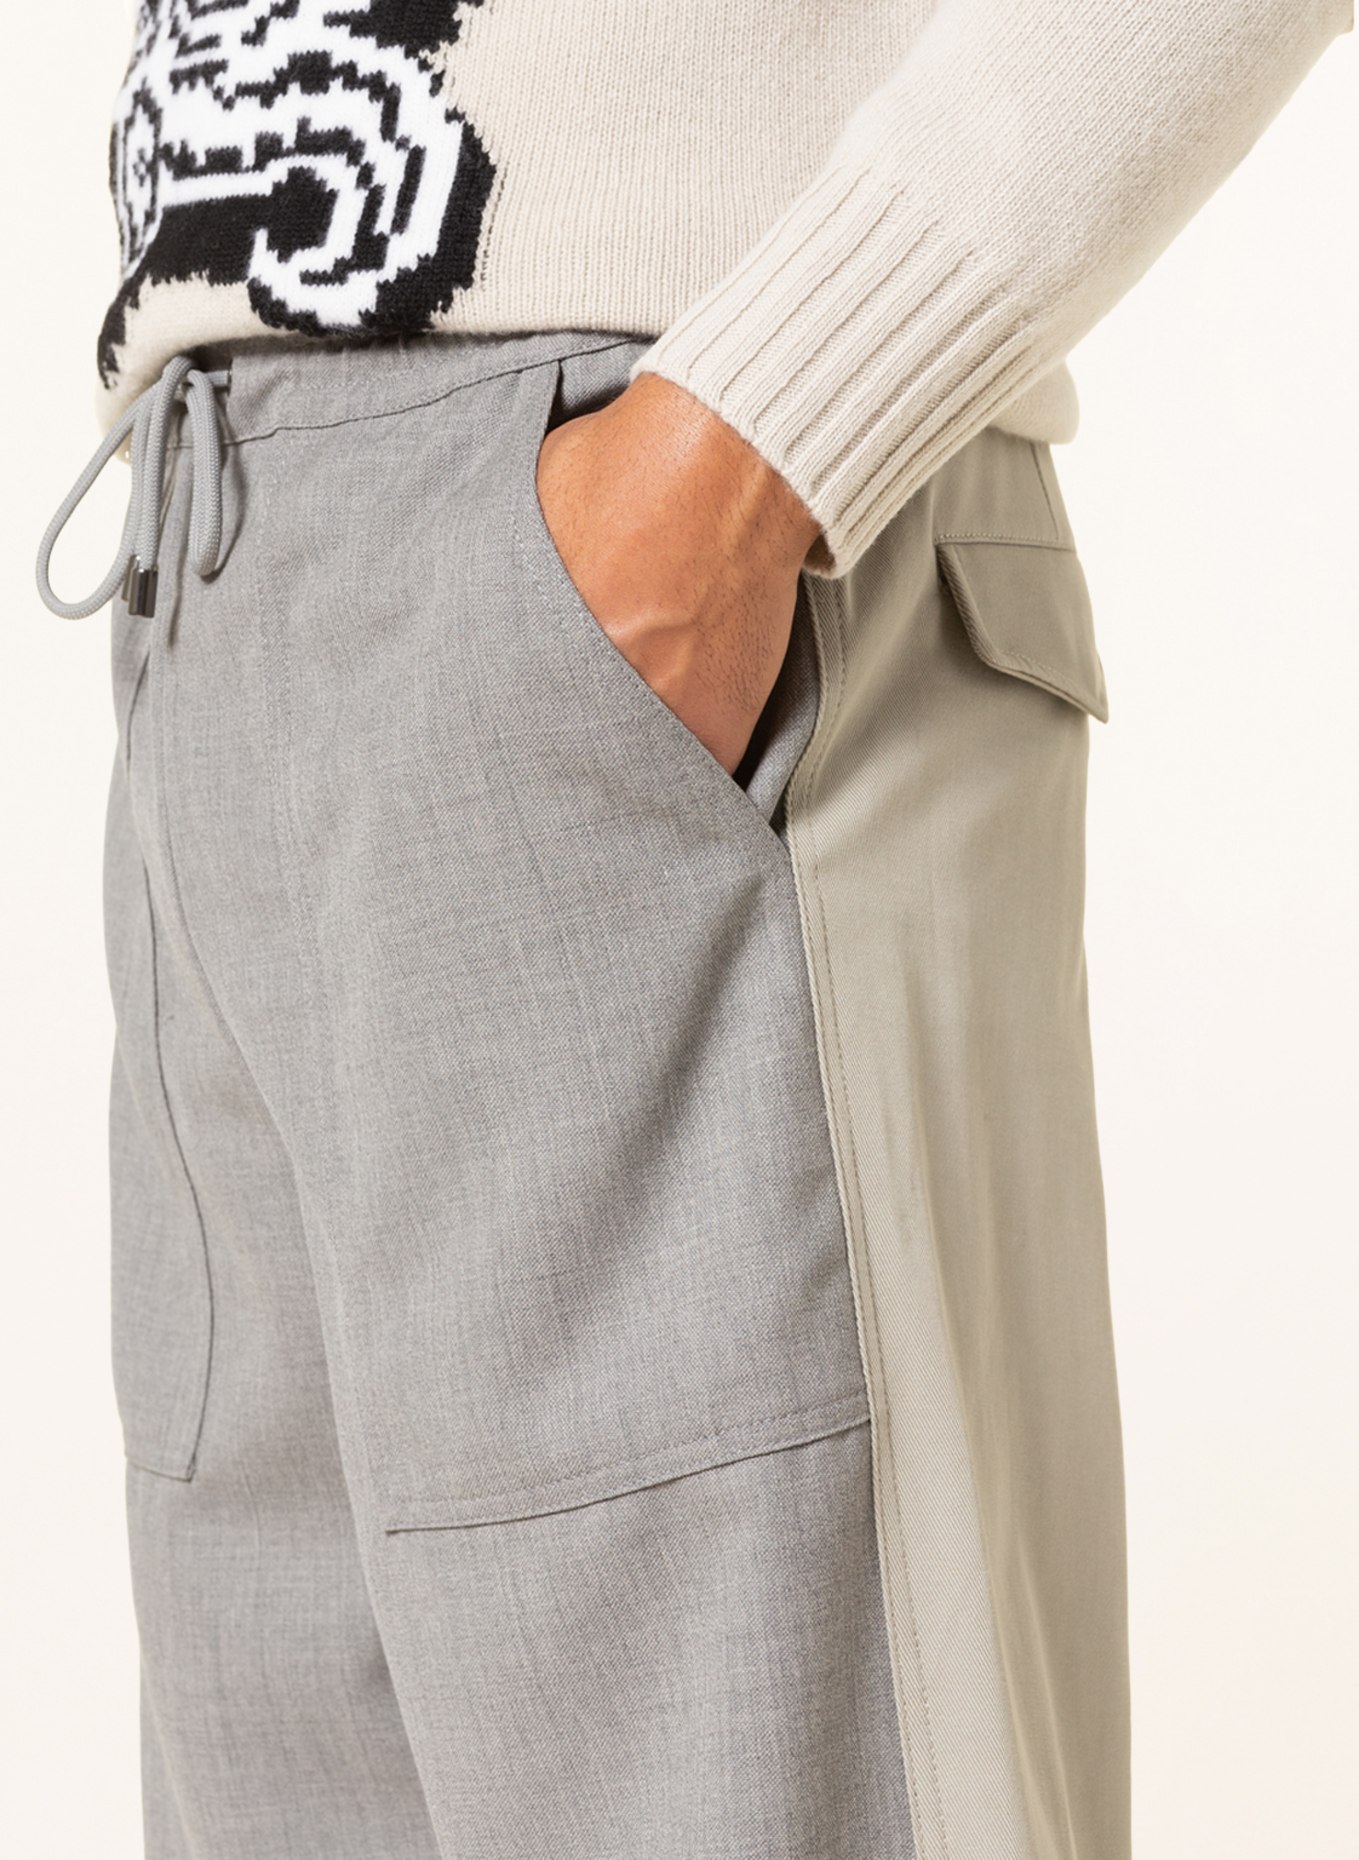 ETRO Pants in jogger style regular fit , Color: GRAY/ BEIGE (Image 5)